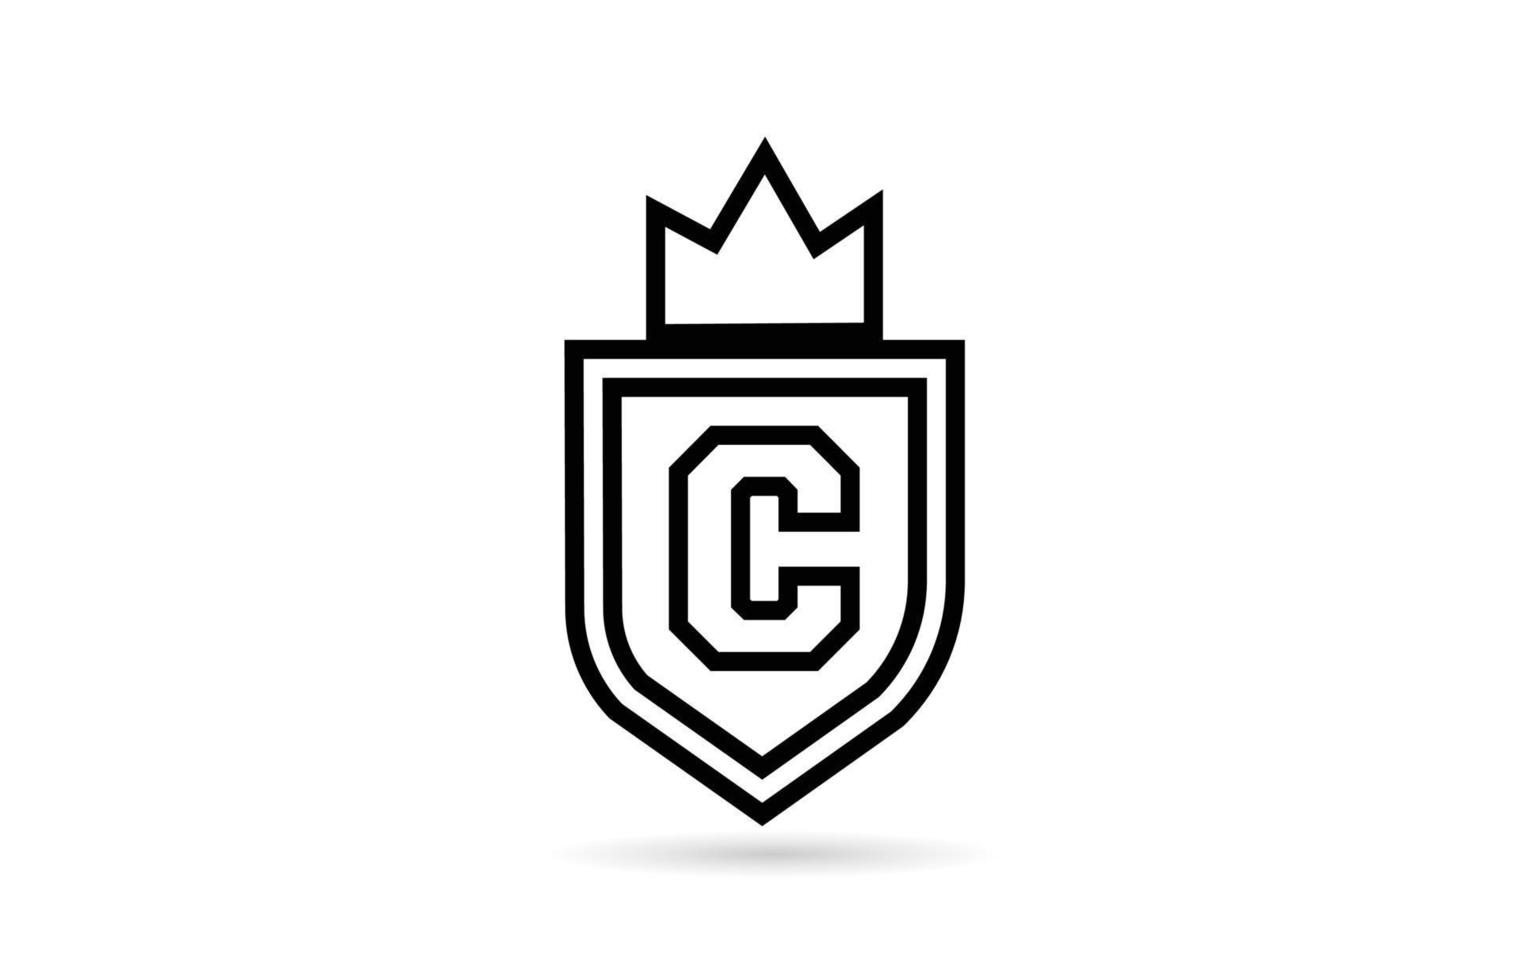 black and white C alphabet letter icon logo with shield and king crown line design. Creative template for business and company vector